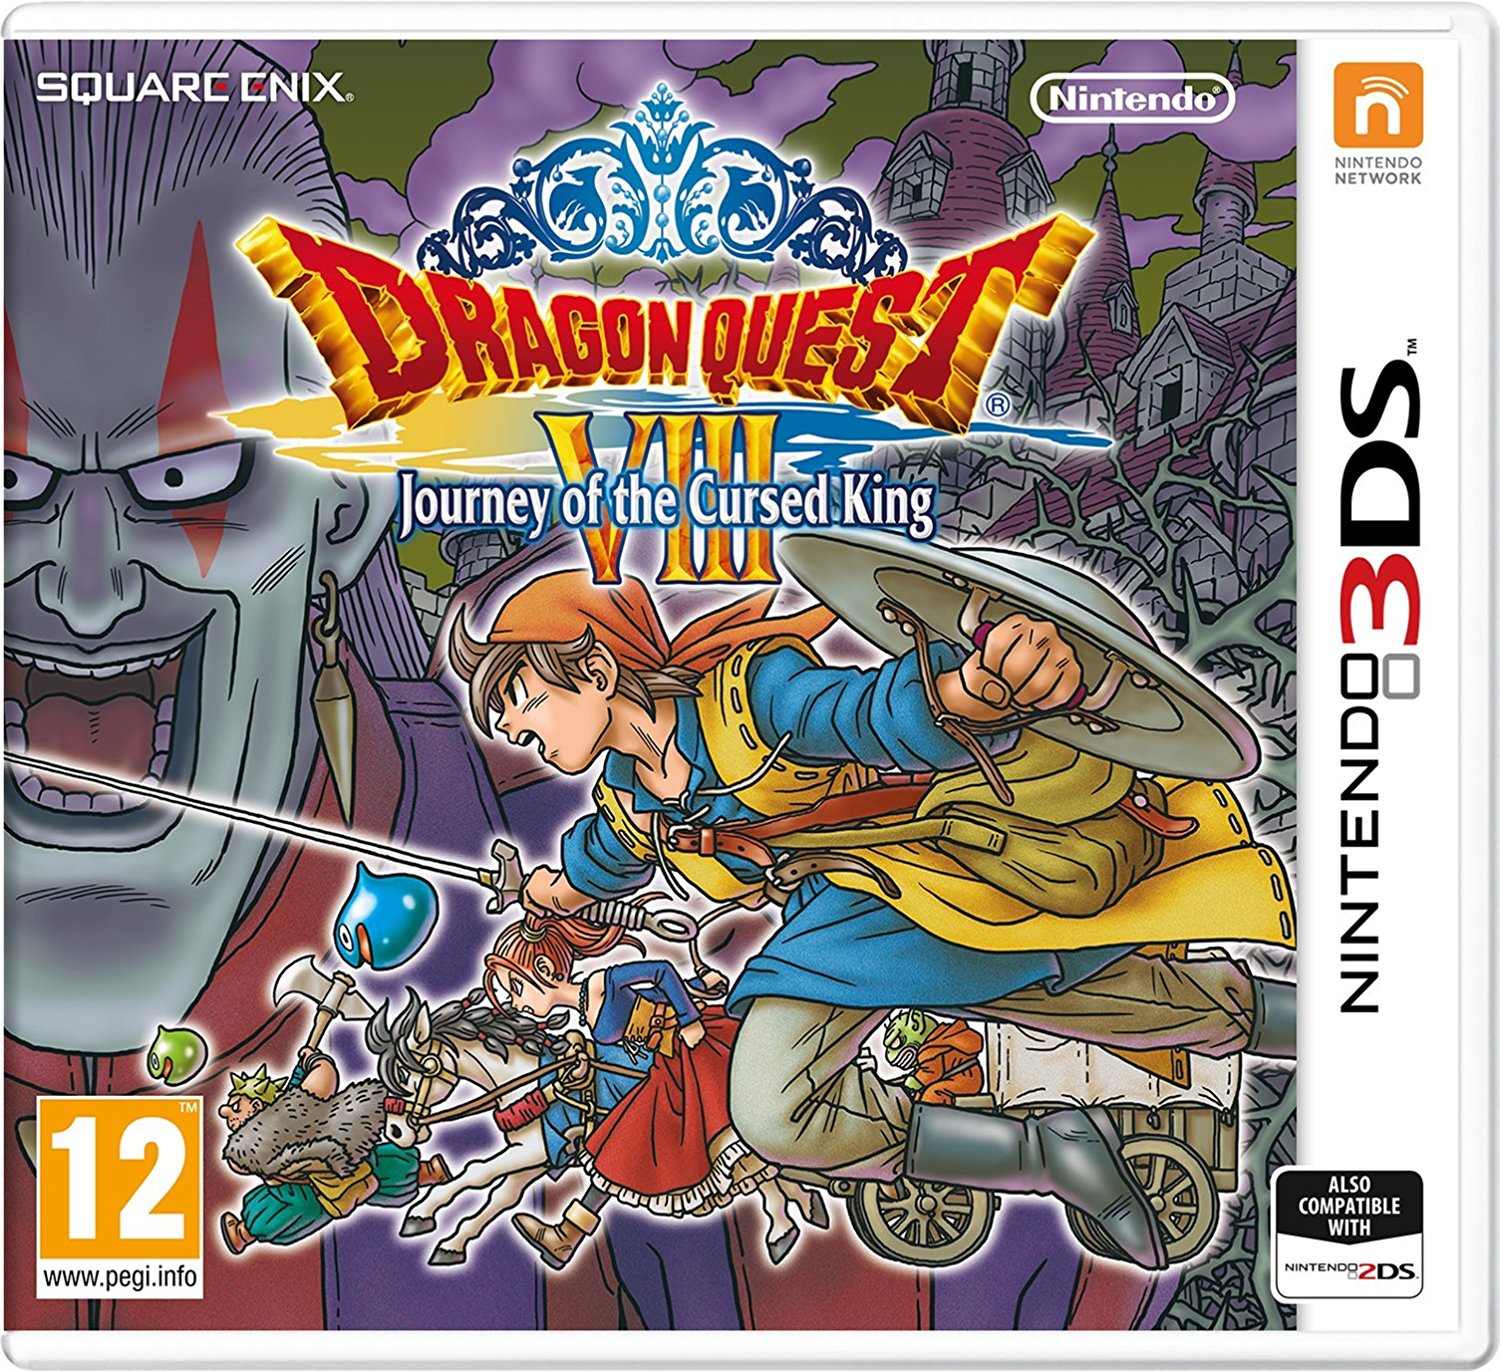 Dragon Quest VIII - Journey of the Cursed King 3